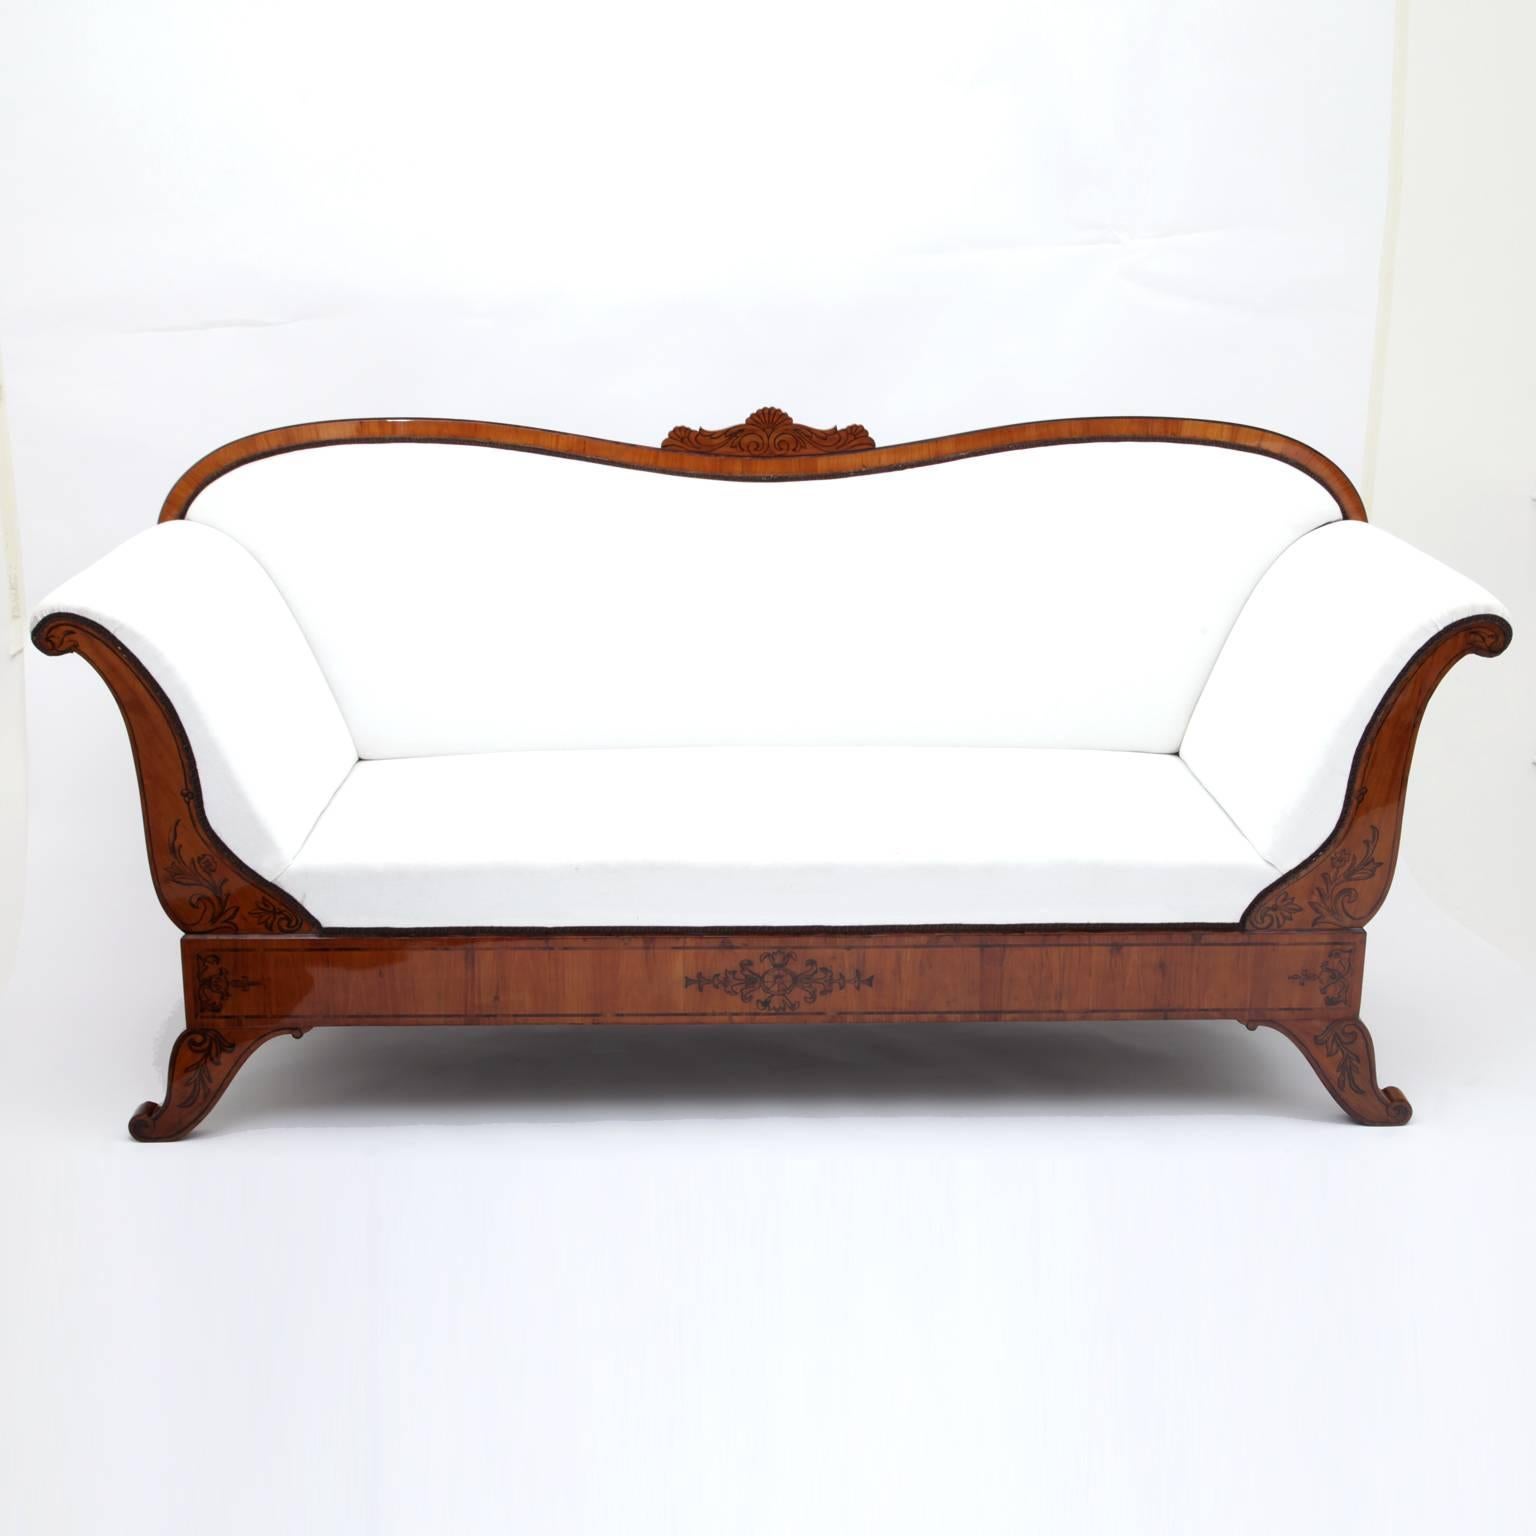 Elegant Biedermeier sofa on tapered legs. Curved backrest with s-shaped armrests. Lower rim, legs and armrests are decorated with floral motives in Schwarzlot.